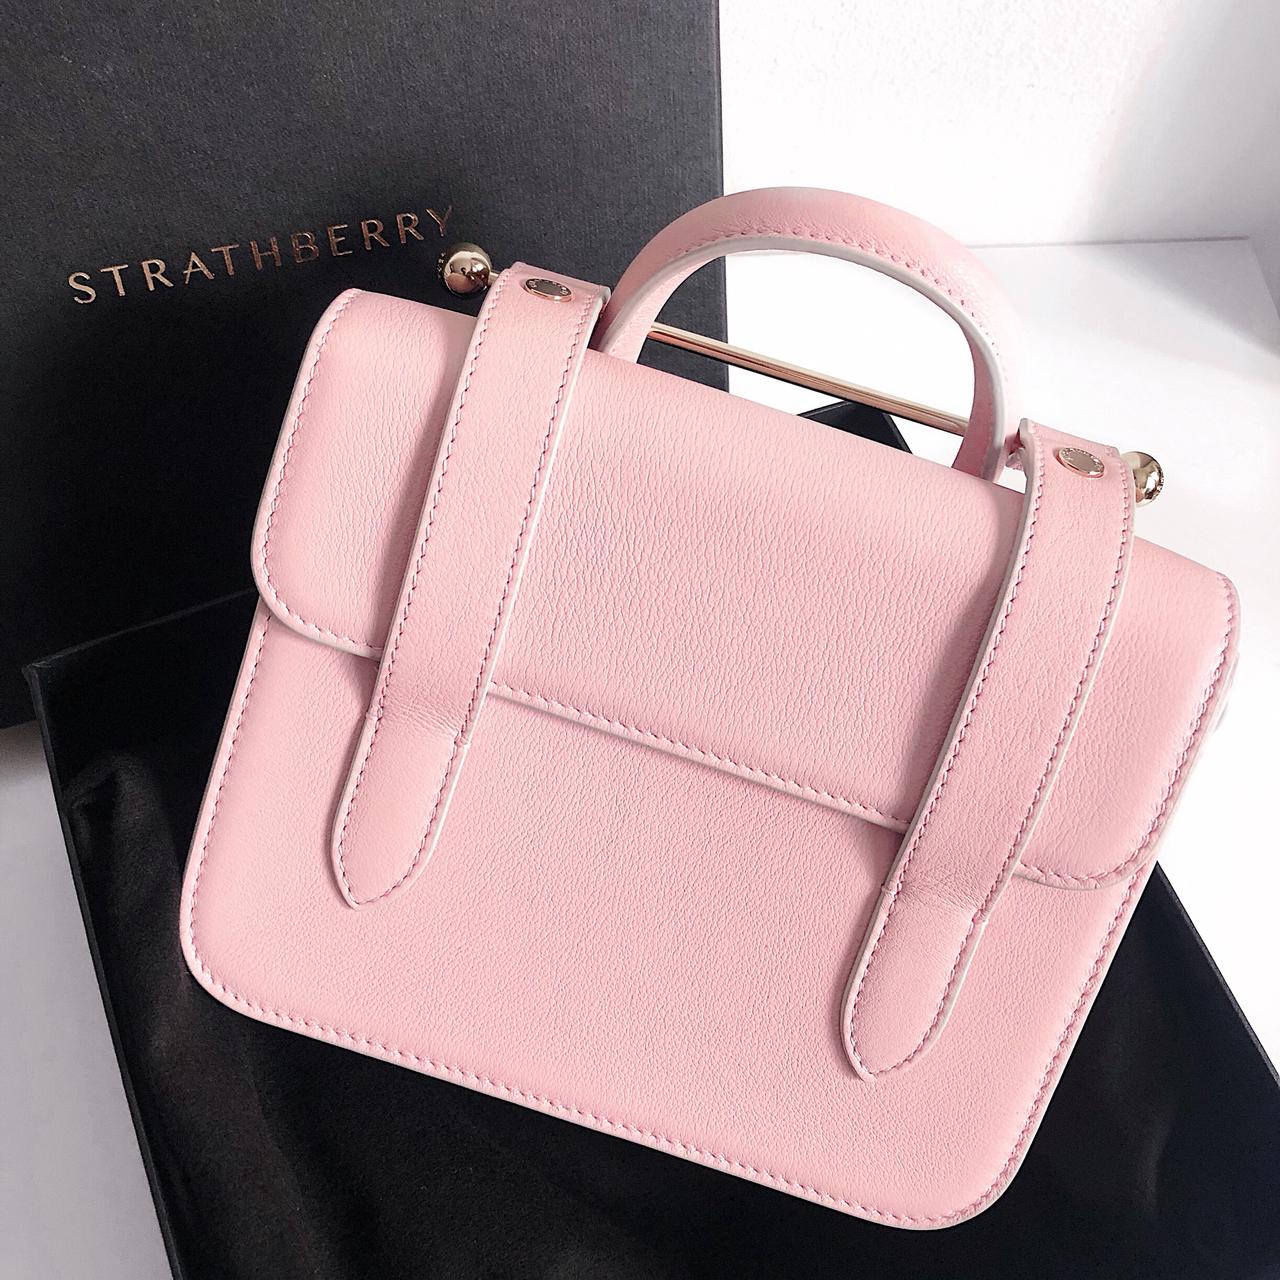 Strathberry - AVAILABLE NOW! The MC Midi in Dusky Pink as